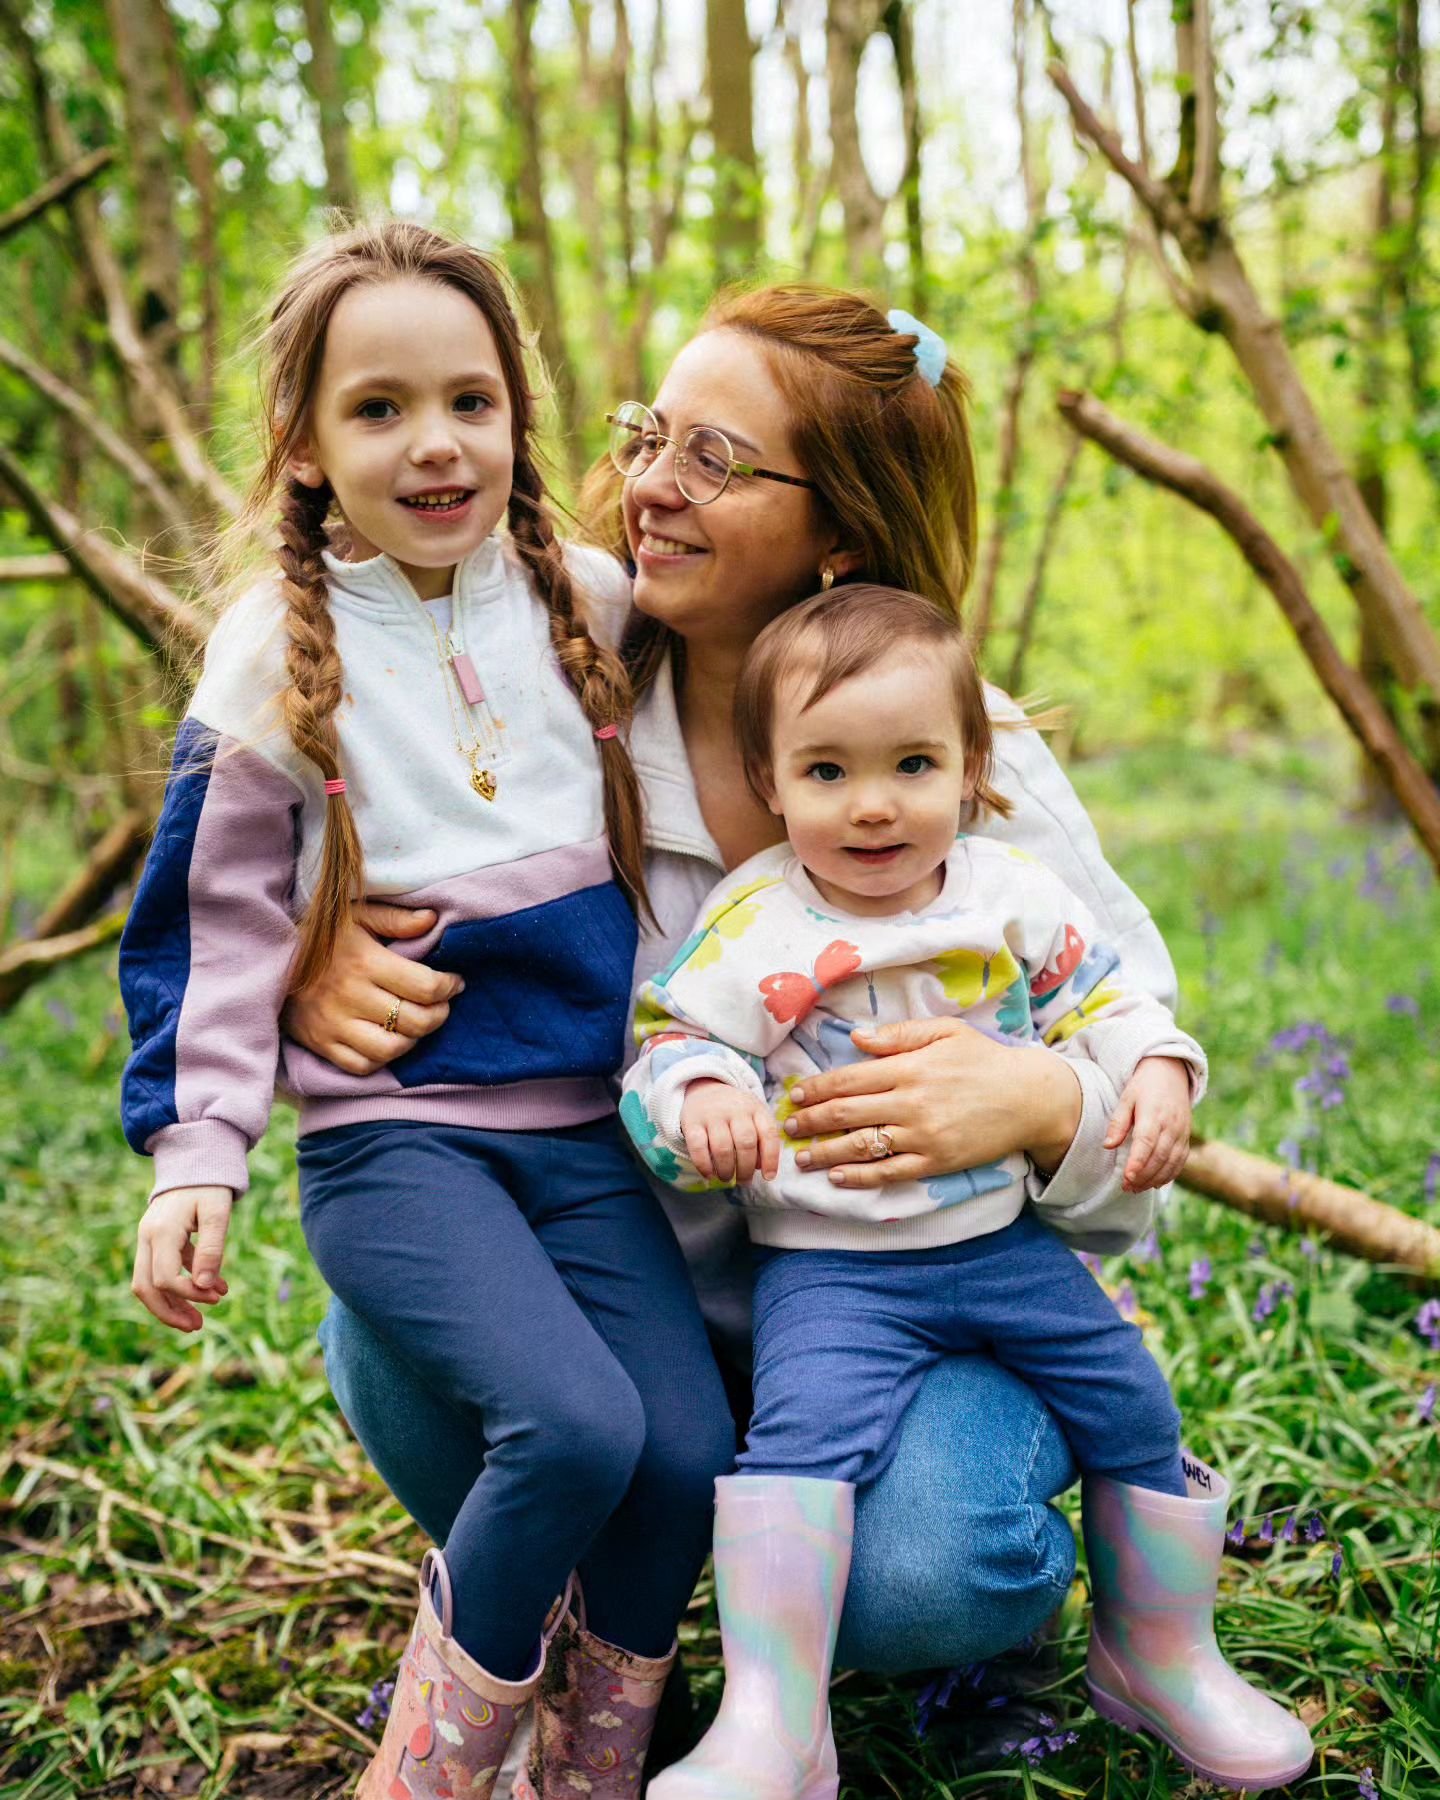 I honestly have such a lovely time with all the families I photograph ❤️📷 More shoots like this please 🙏
.
#katiecalverphotography #bedfordshirephotographer #bedfordphotographer #photography #photographer #photo #photographylover #photoshoot  #newb